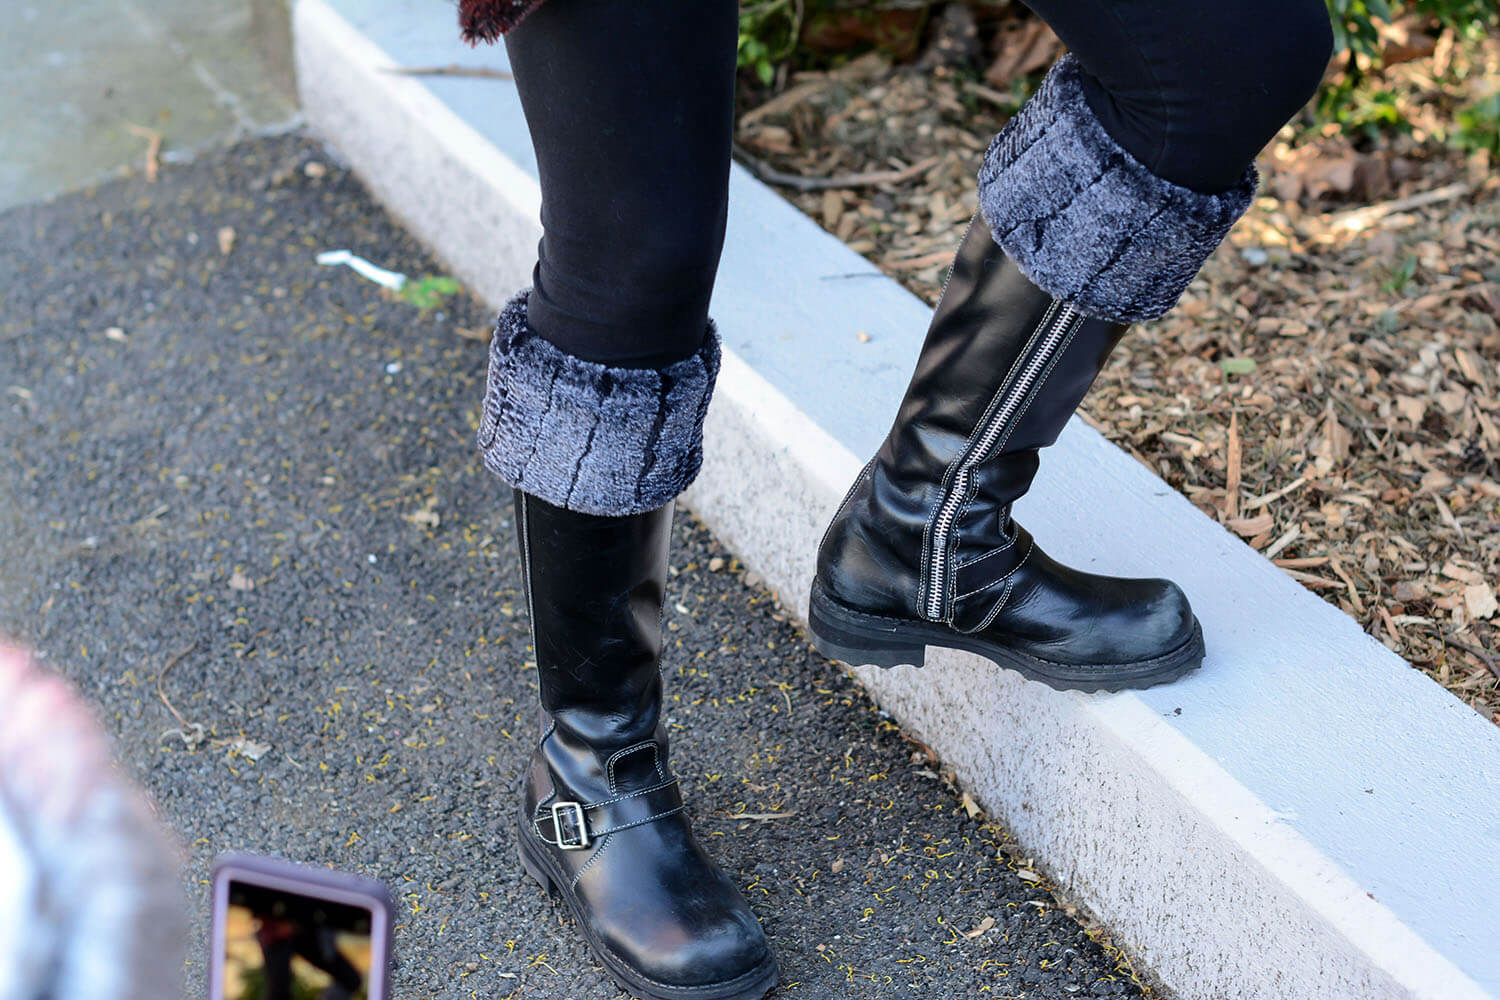 Selecting Versatile Winter Essentials: Get The Most From Your Winter Wardrobe - Jenn O.